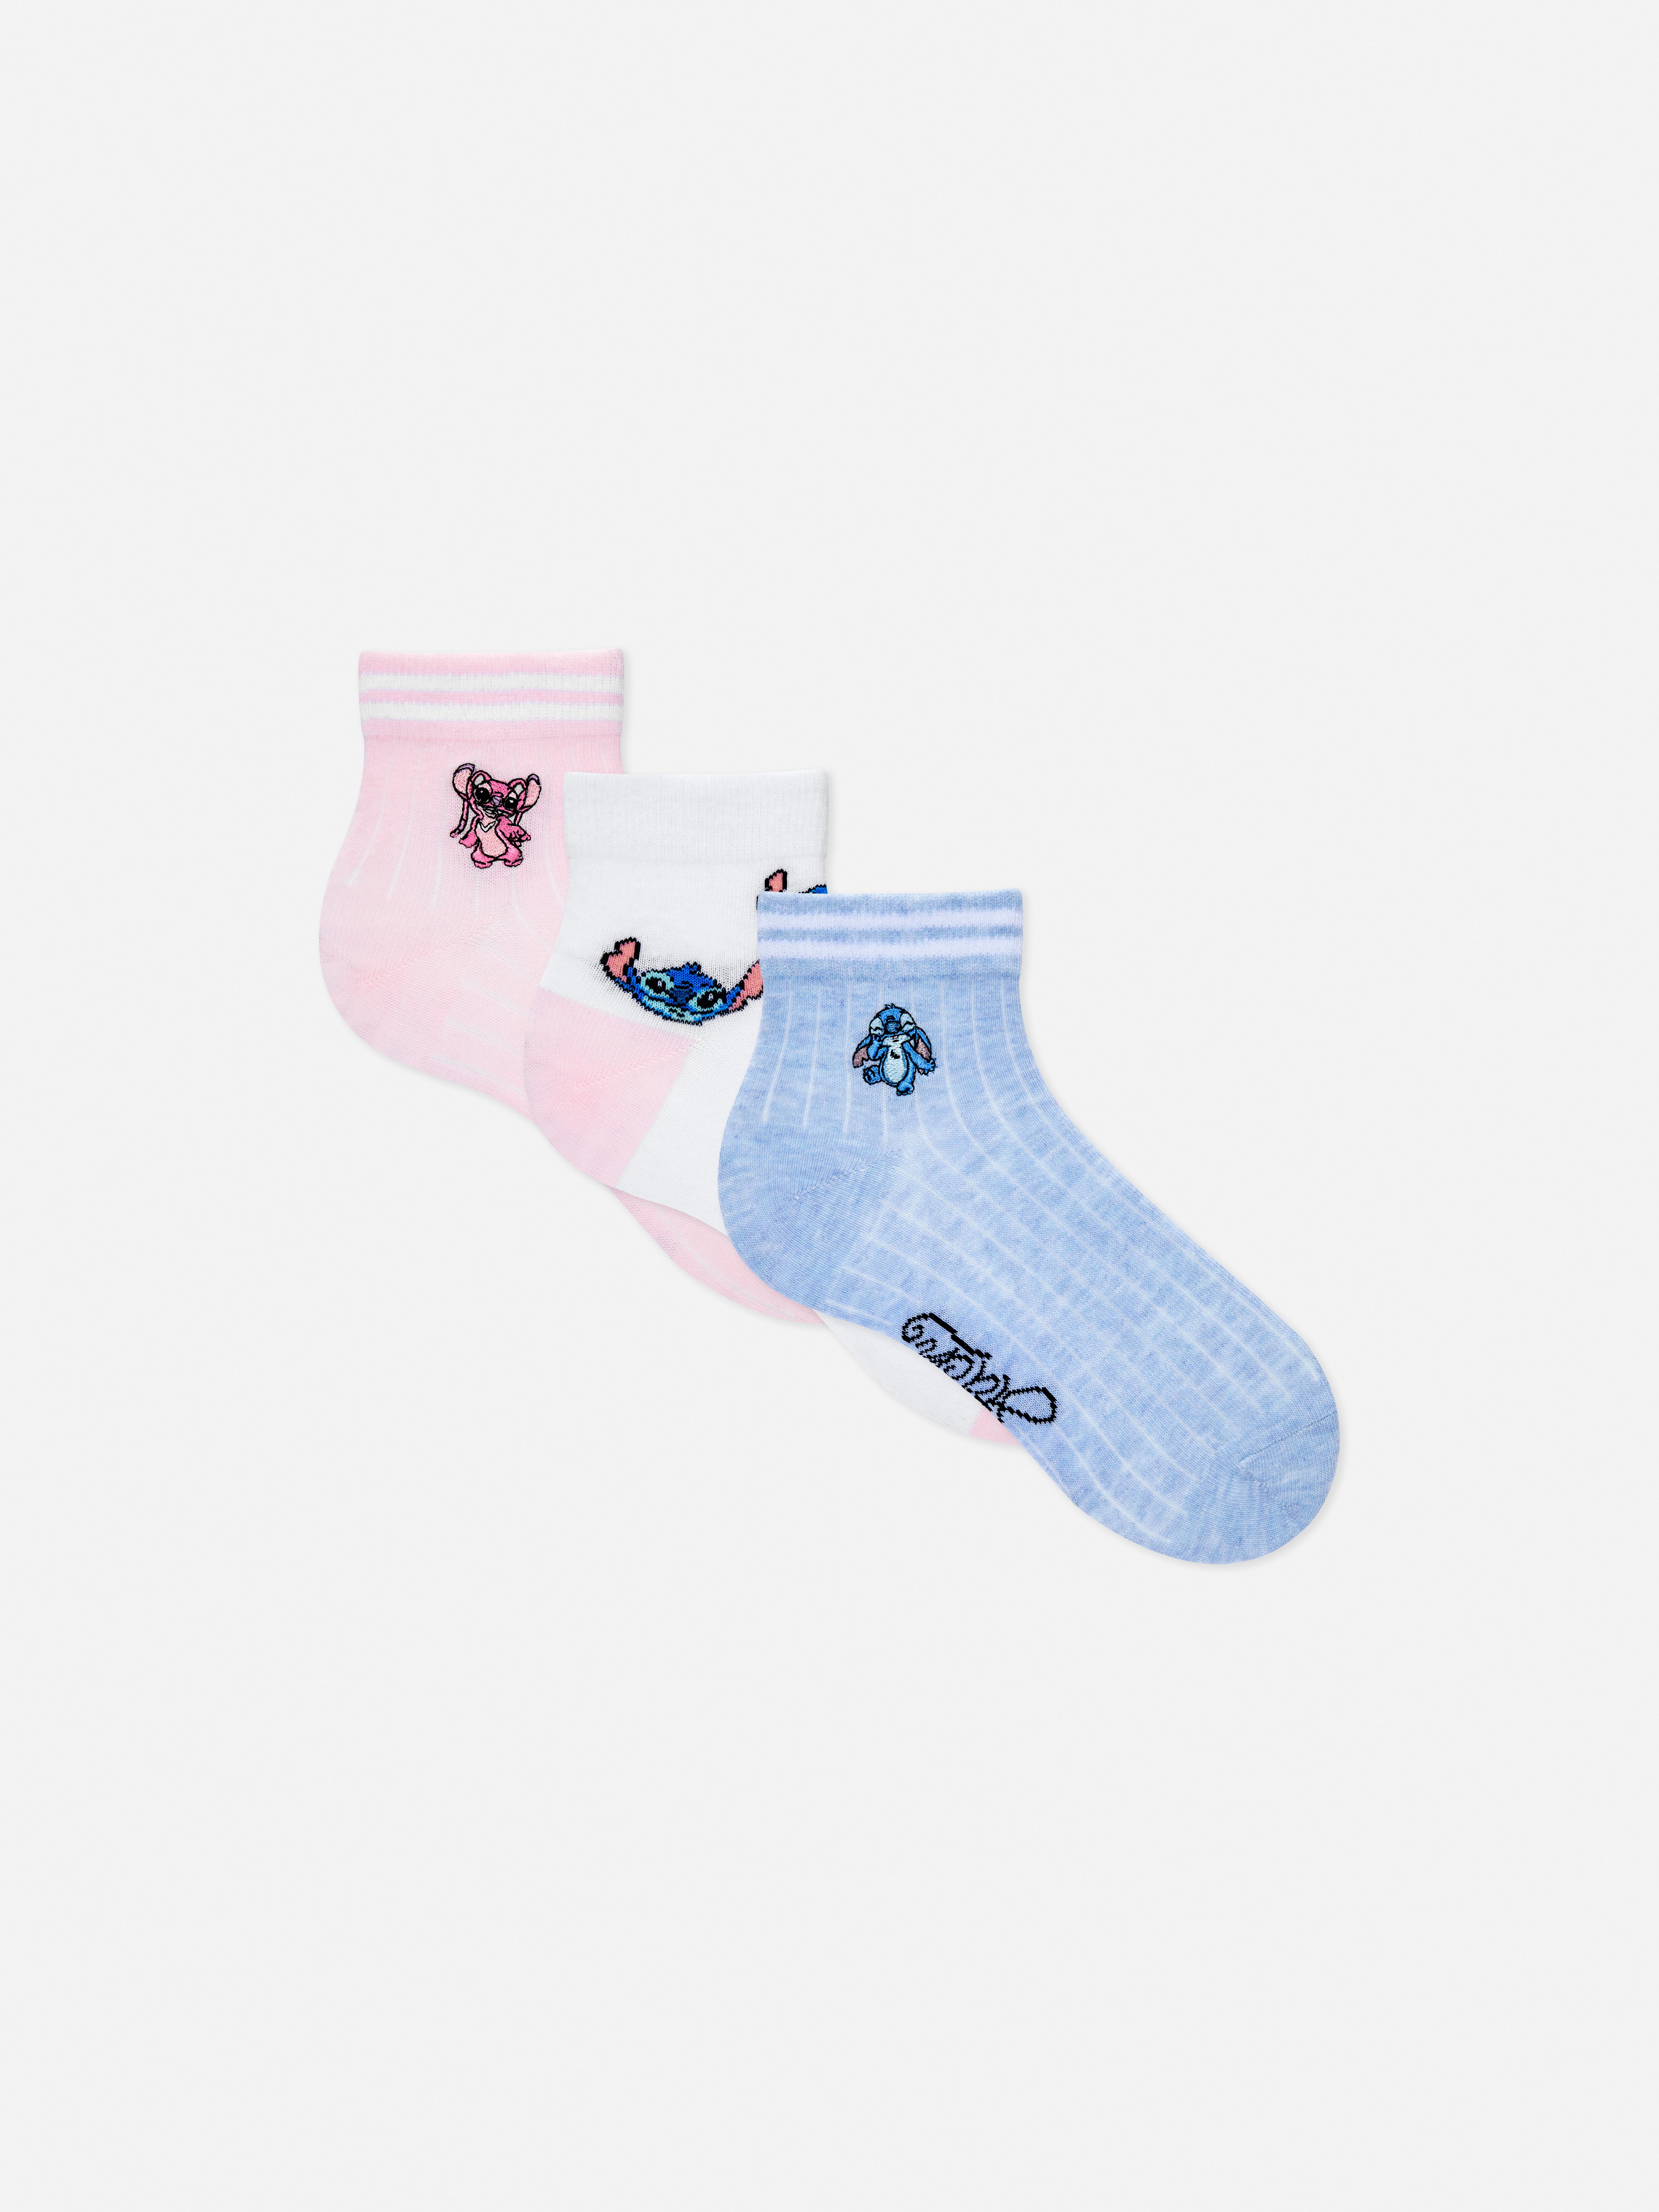 Stitch from the film Lilo and Stitch Slipper Socks Ladies Footlets Primark  Size 6-8UK : : Fashion